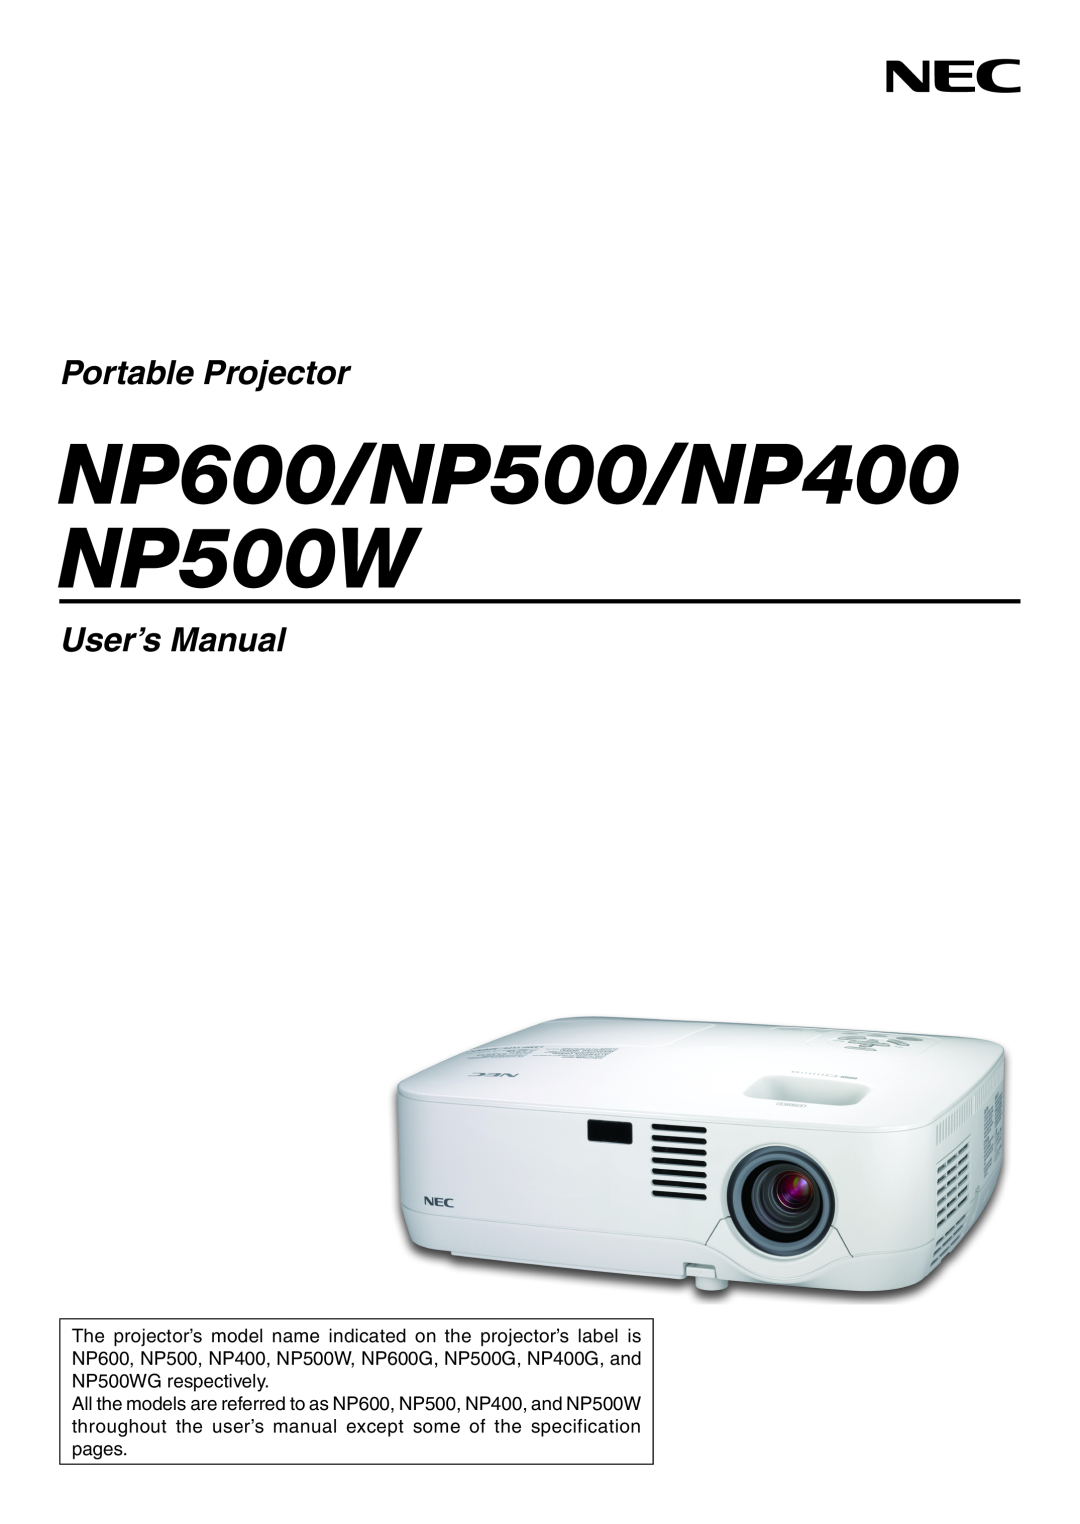 NEC NP500W, NP600, NP400, NP300 quick start NP Portable Series, Portable Projectors, Essential Features For Ease Of Use 